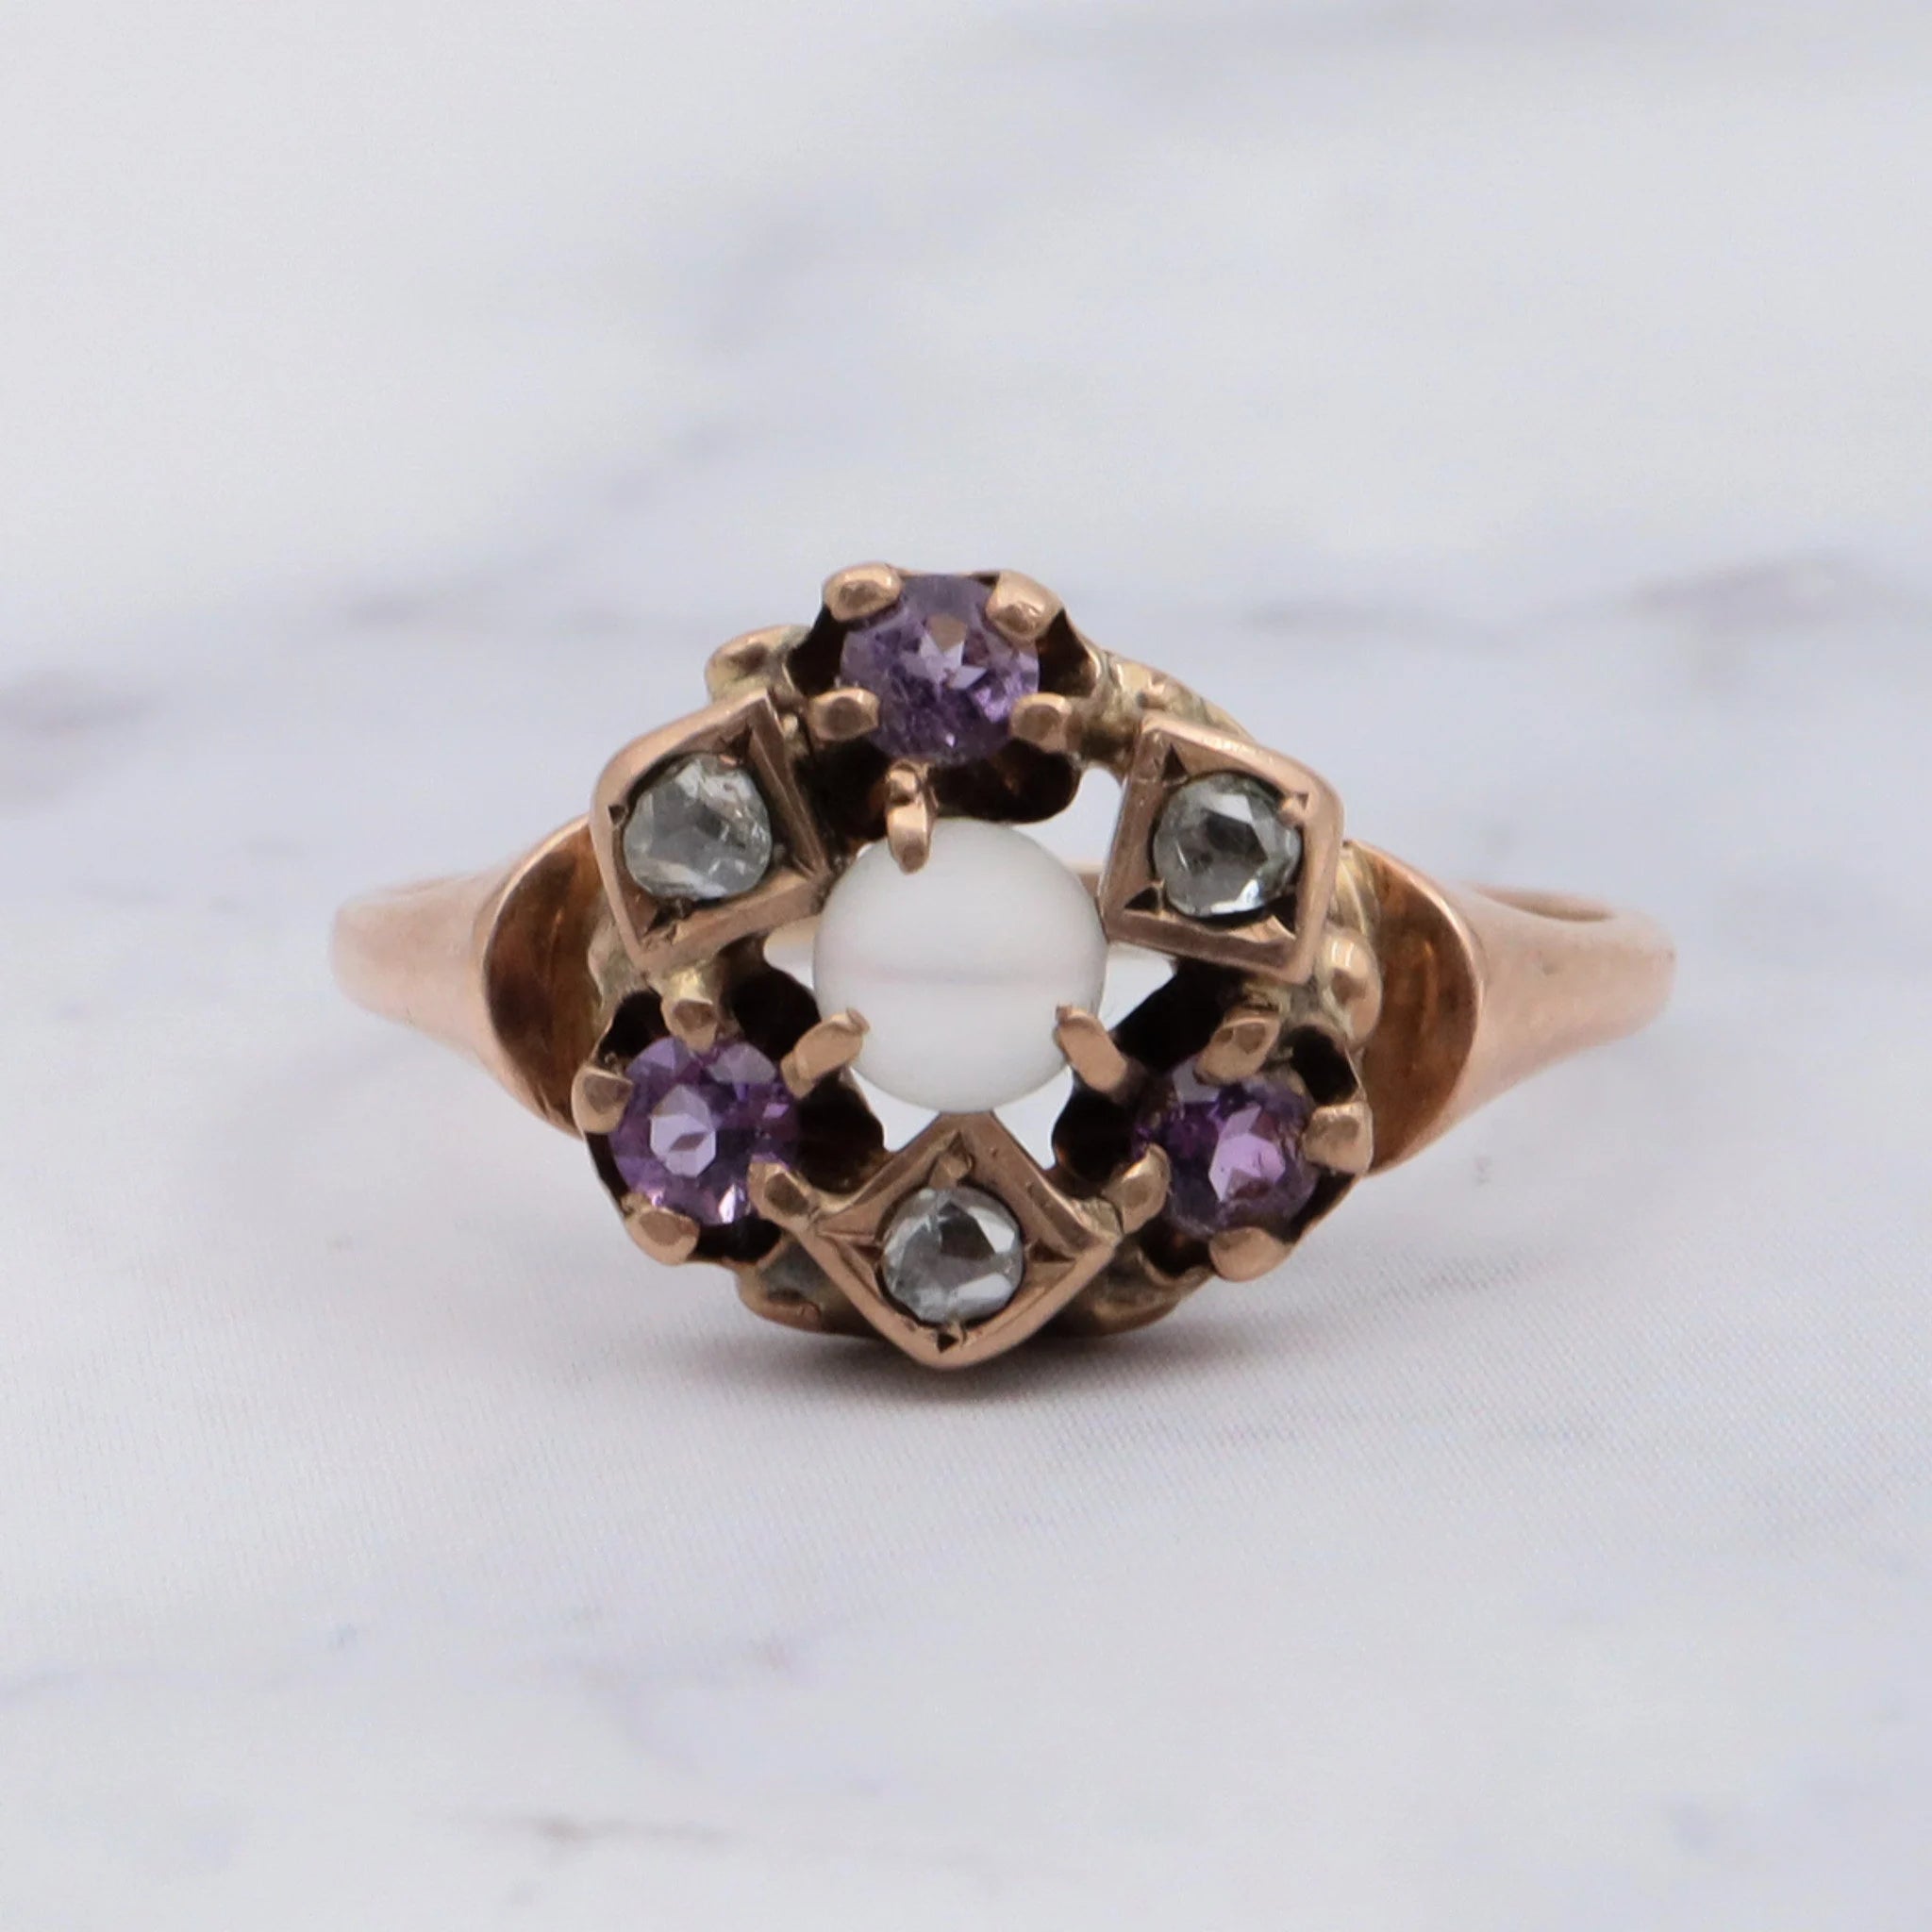 Antique Victorian 10K Gold Ring with Moonstone Orb, Rose Cut Diamond, & Amethyst Accents - Size 4